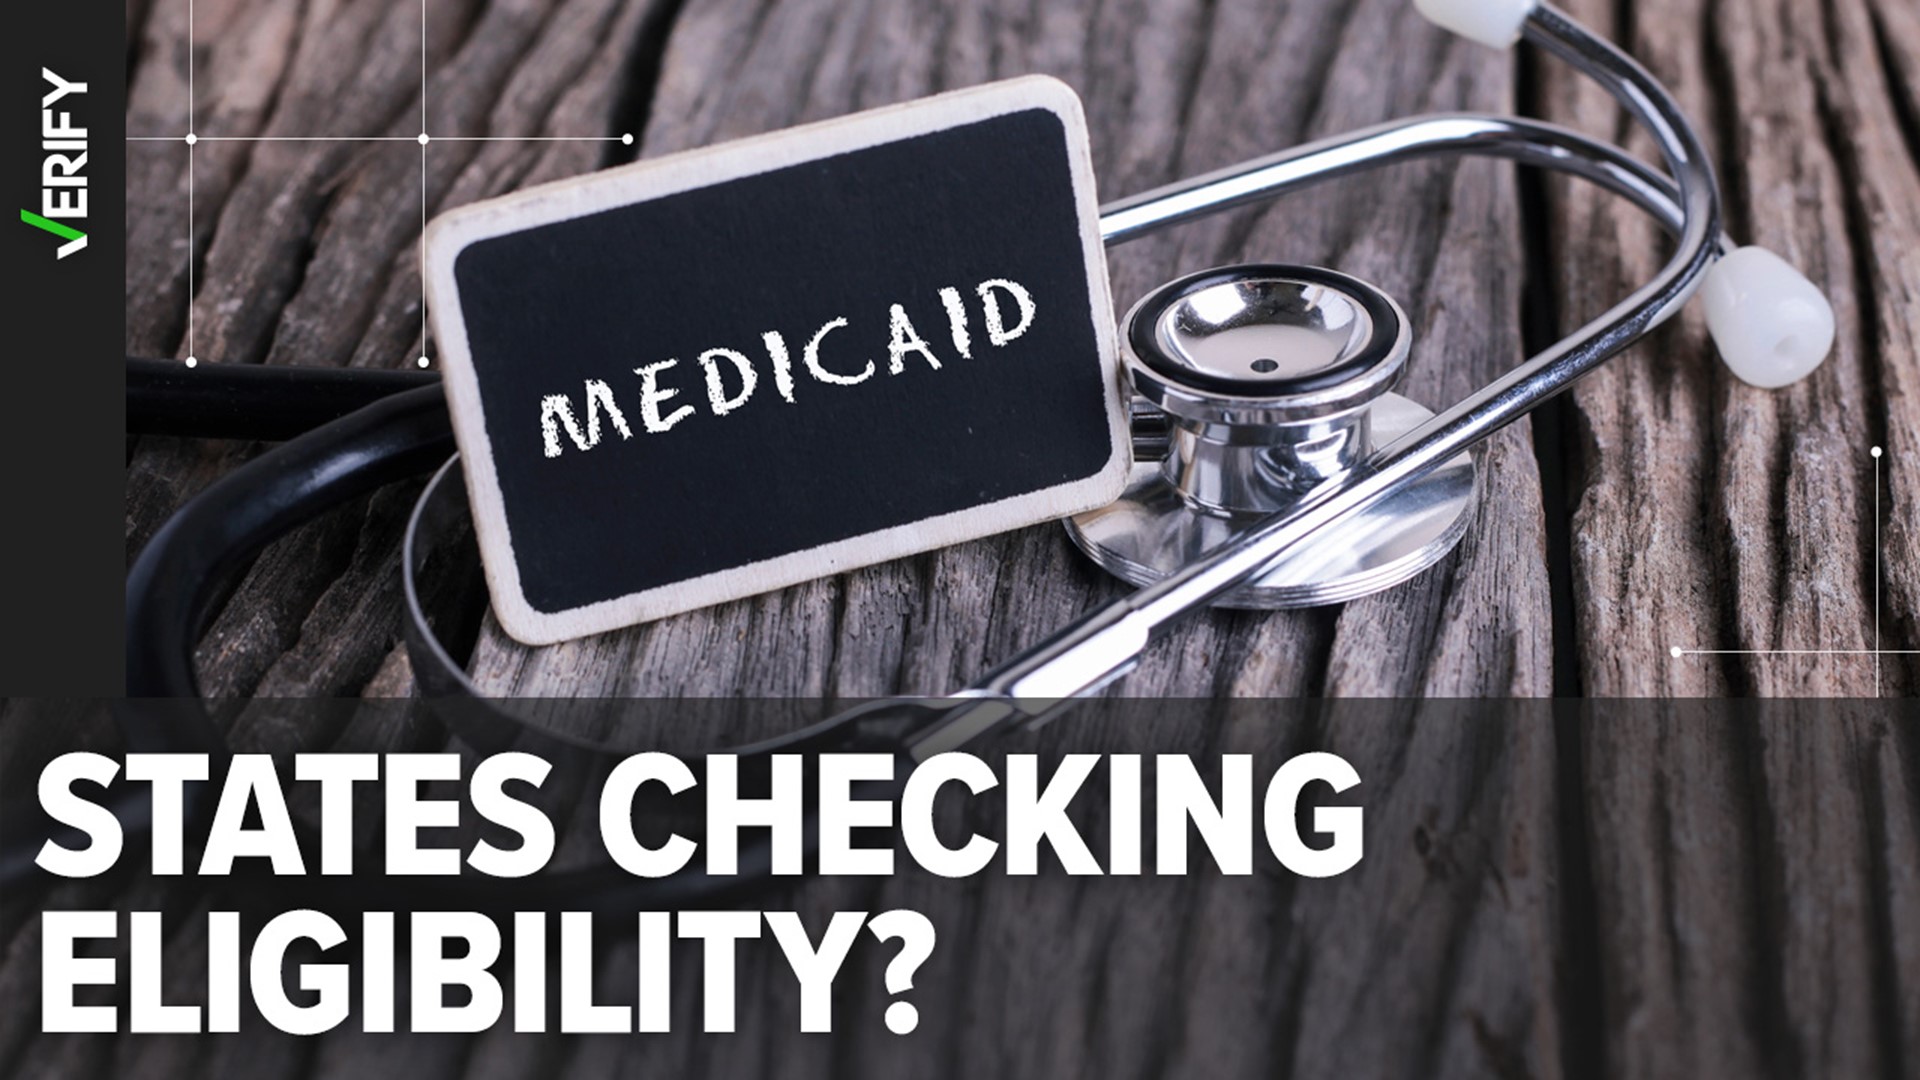 Here’s what you need to know so you don’t lose coverage for Medicaid or CHIP.